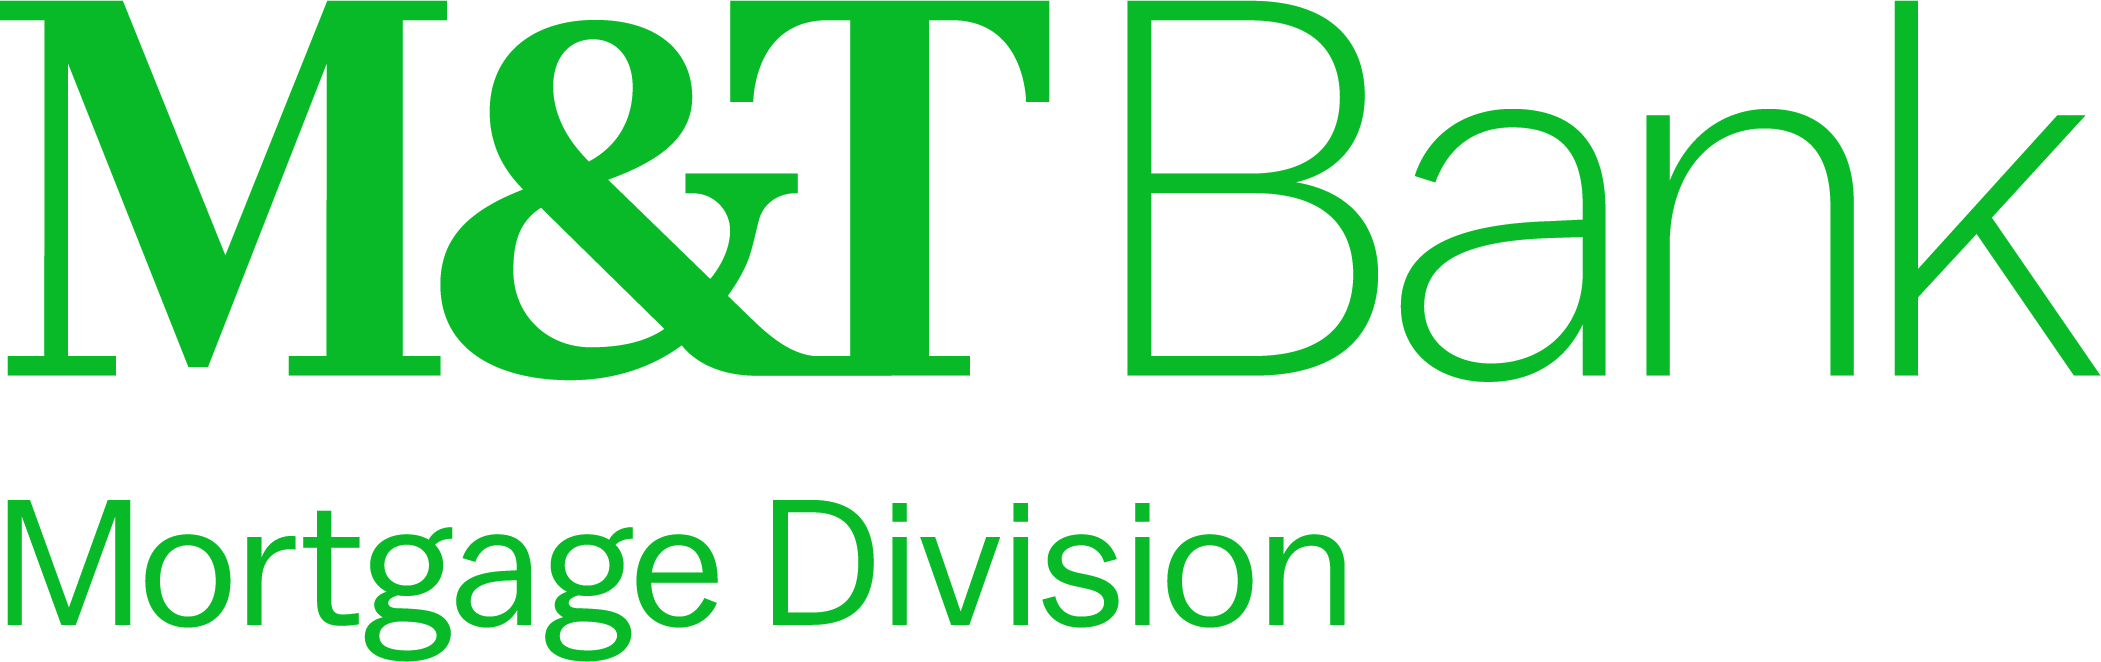 M&T Bank Mortgage Division